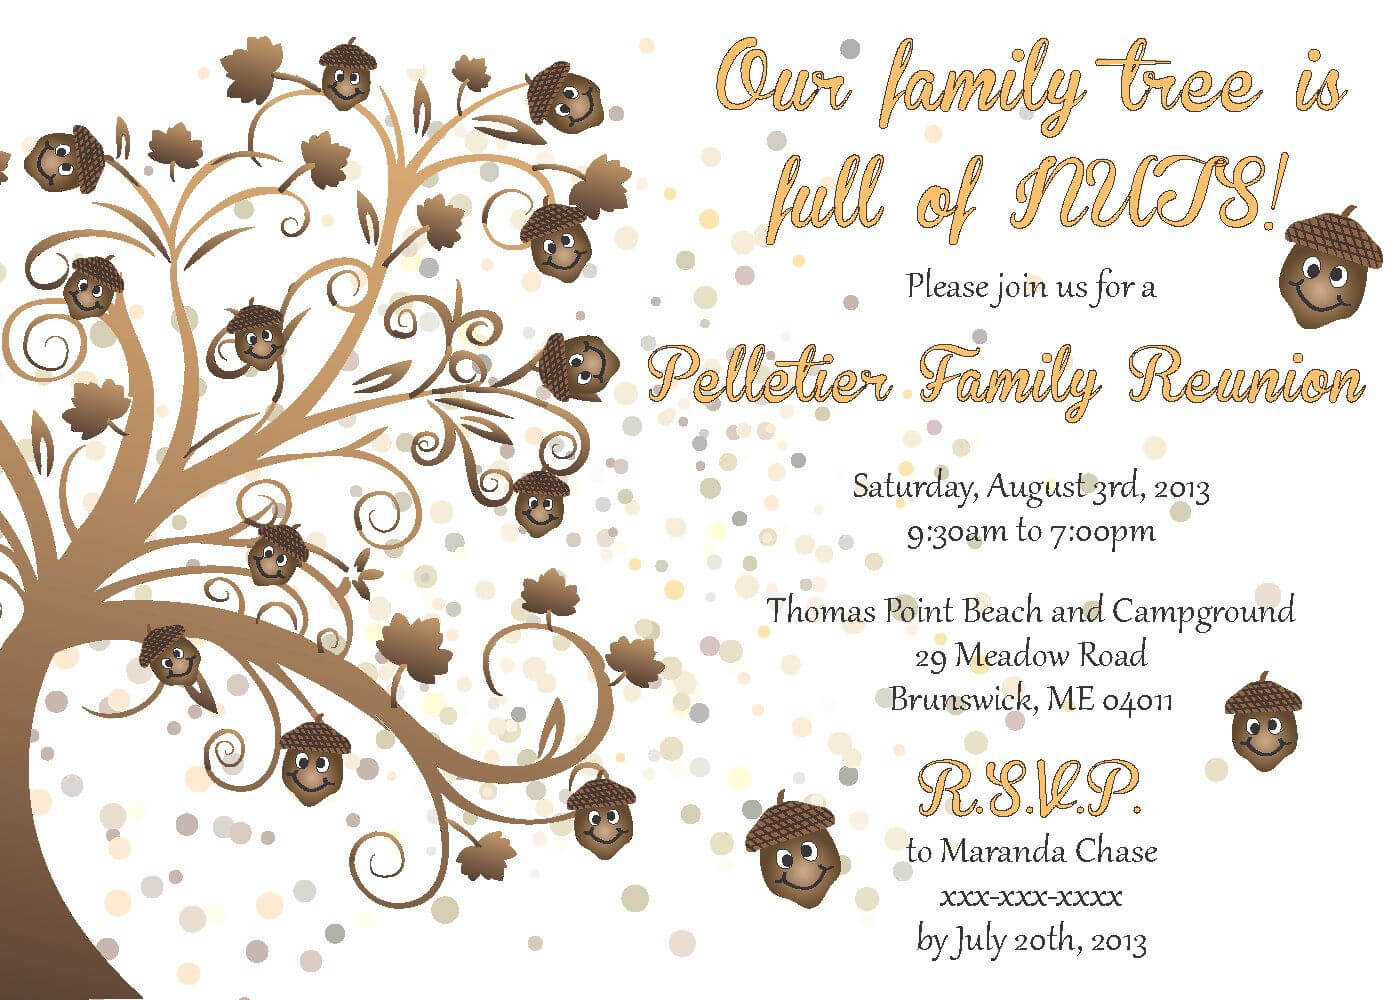 005 Template Ideas Family Reunion Invitations Magnificent Pertaining To Reunion Invitation Card Templates